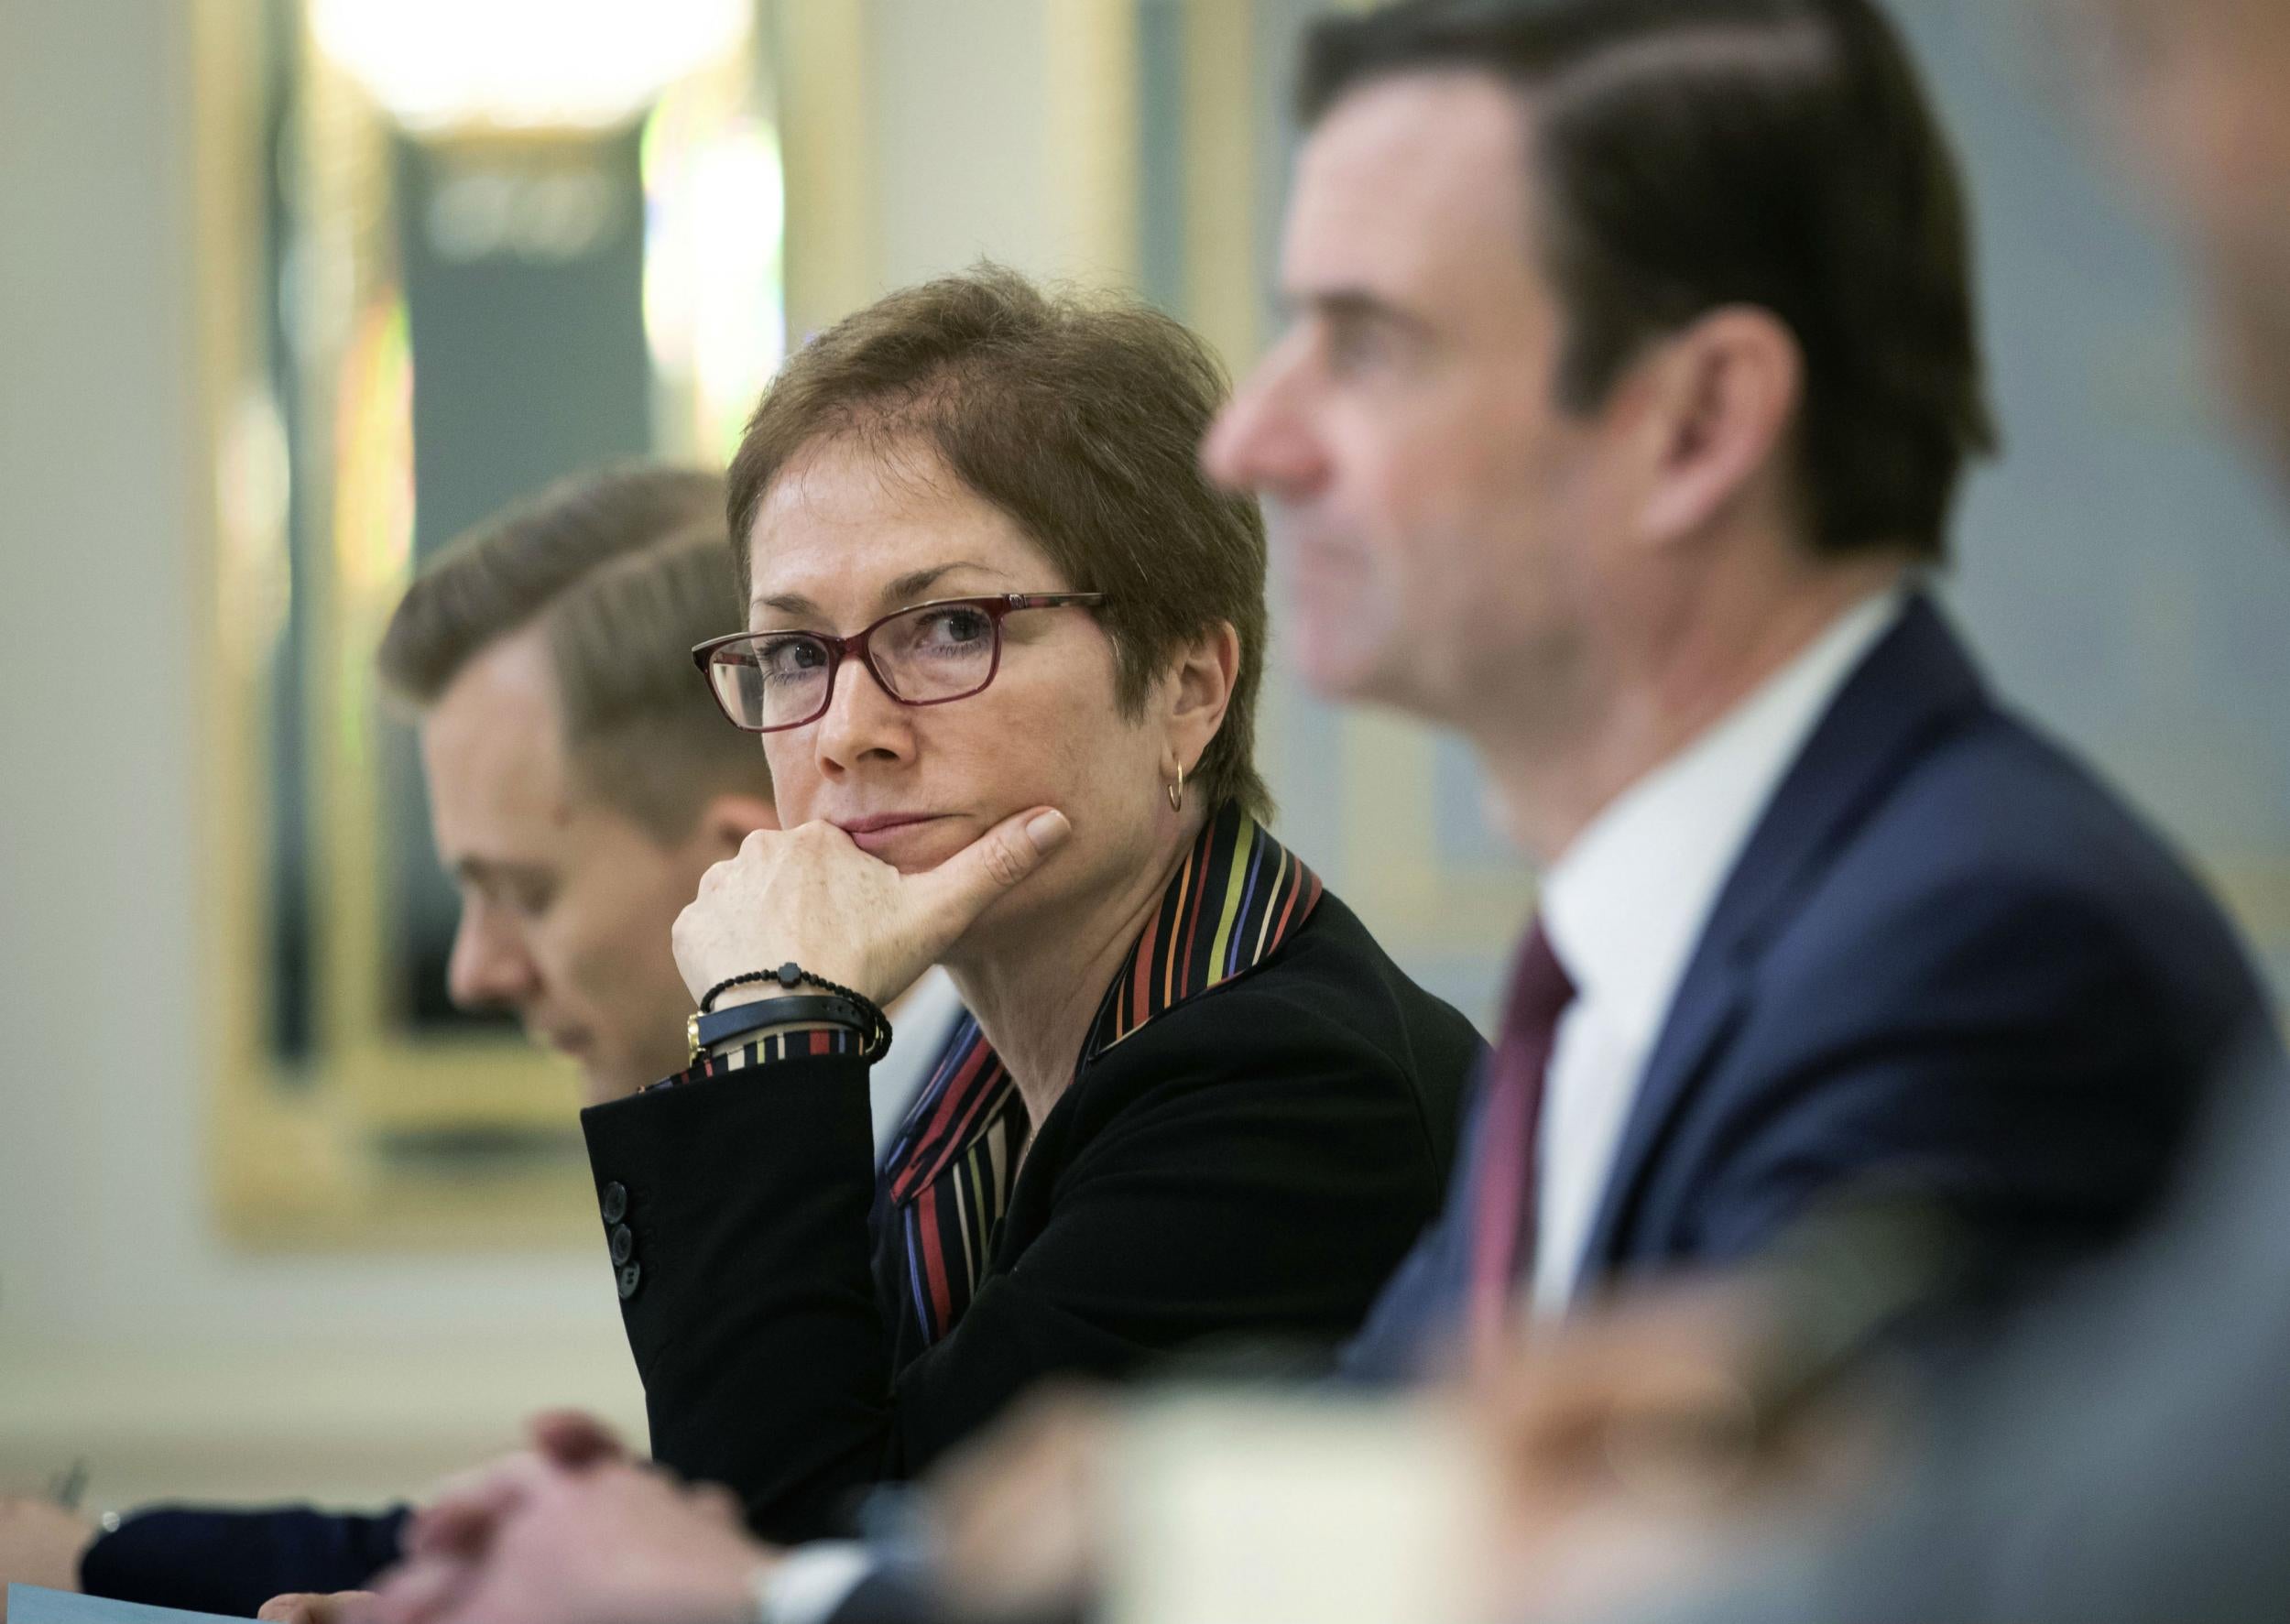 Marie Yovanovitch, the former US ambassador to Ukraine, will give a deposition on October 11